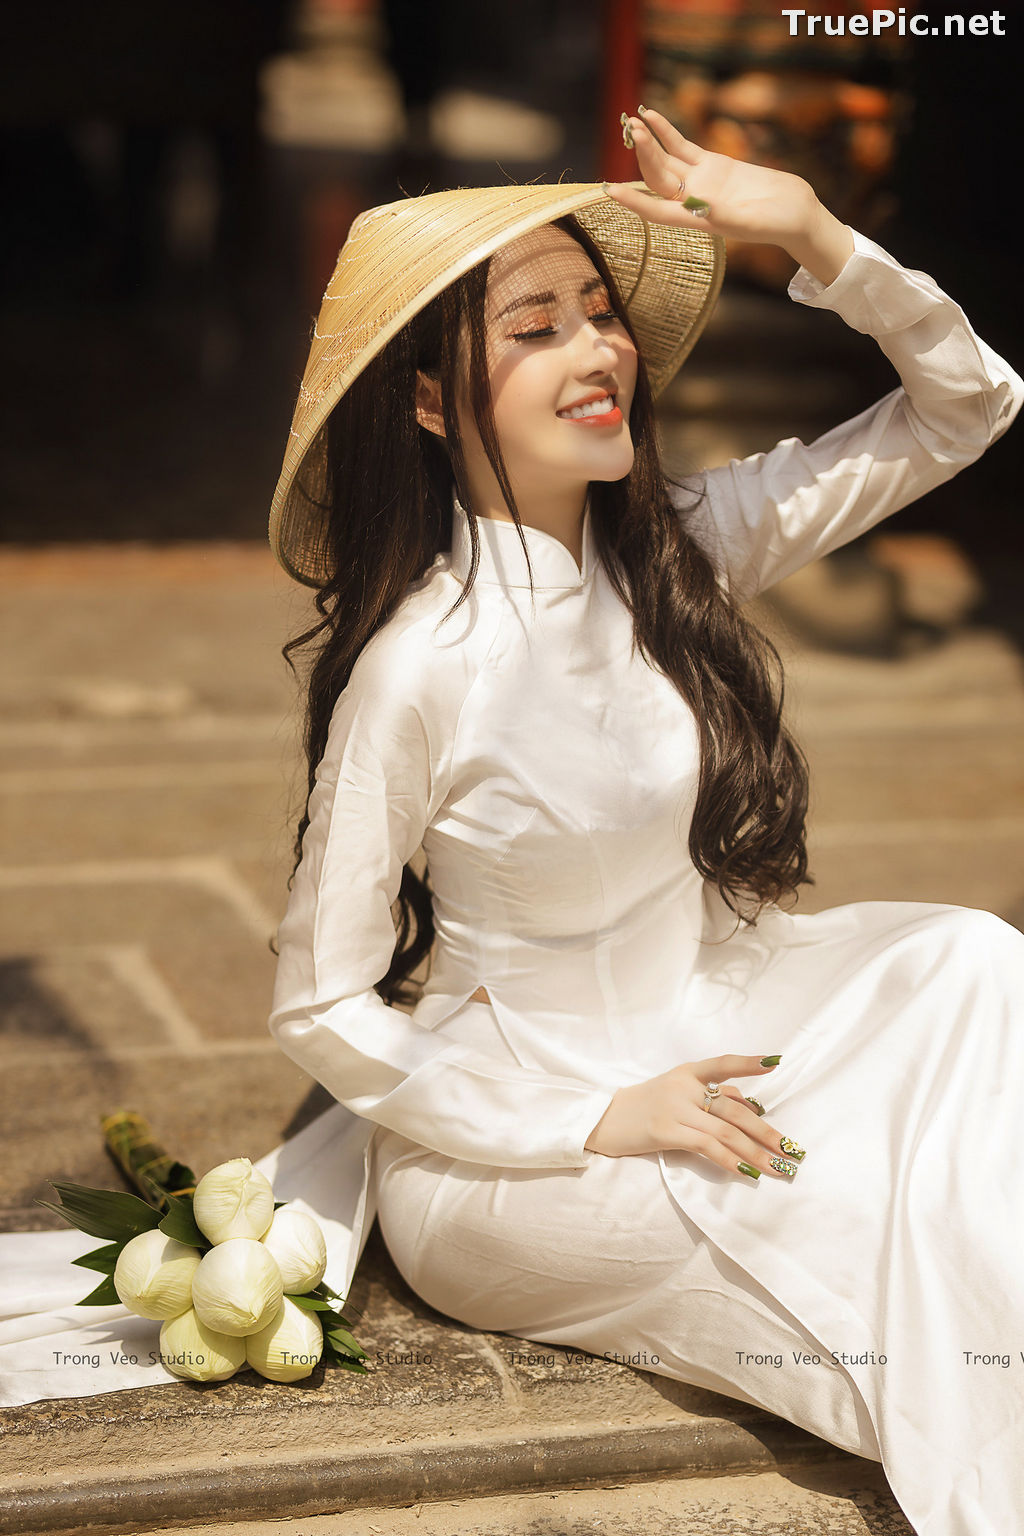 Image The Beauty of Vietnamese Girls with Traditional Dress (Ao Dai) #2 - TruePic.net - Picture-35